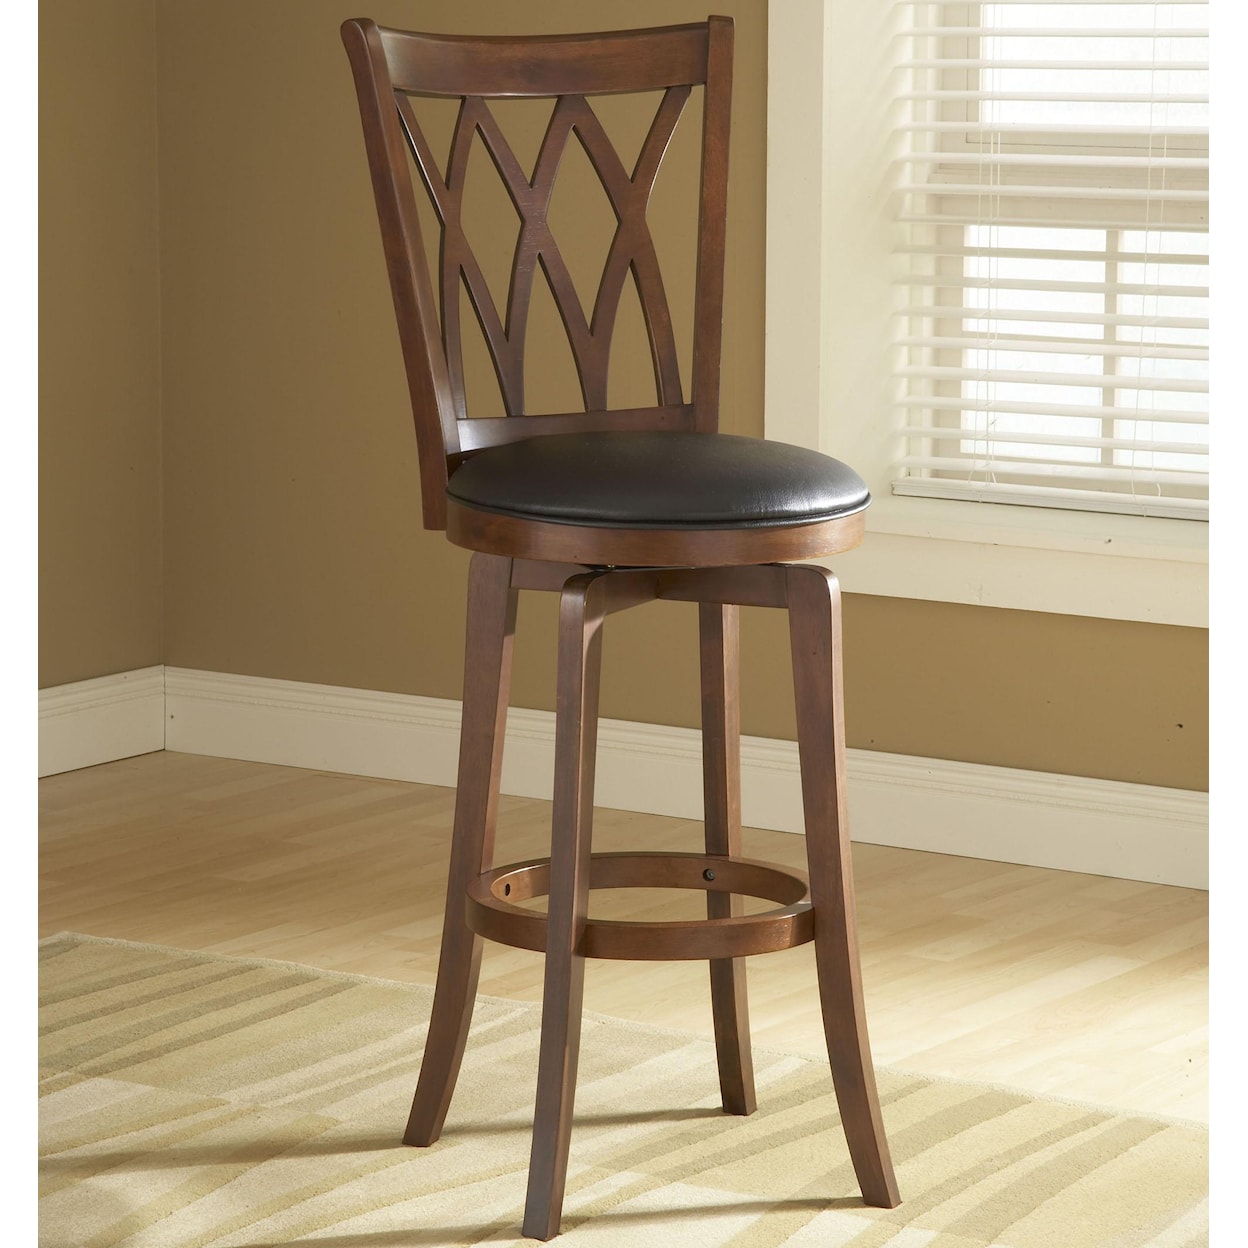 Hillsdale Wood Stools 24" Counter Height Mansfield Swivel Stool